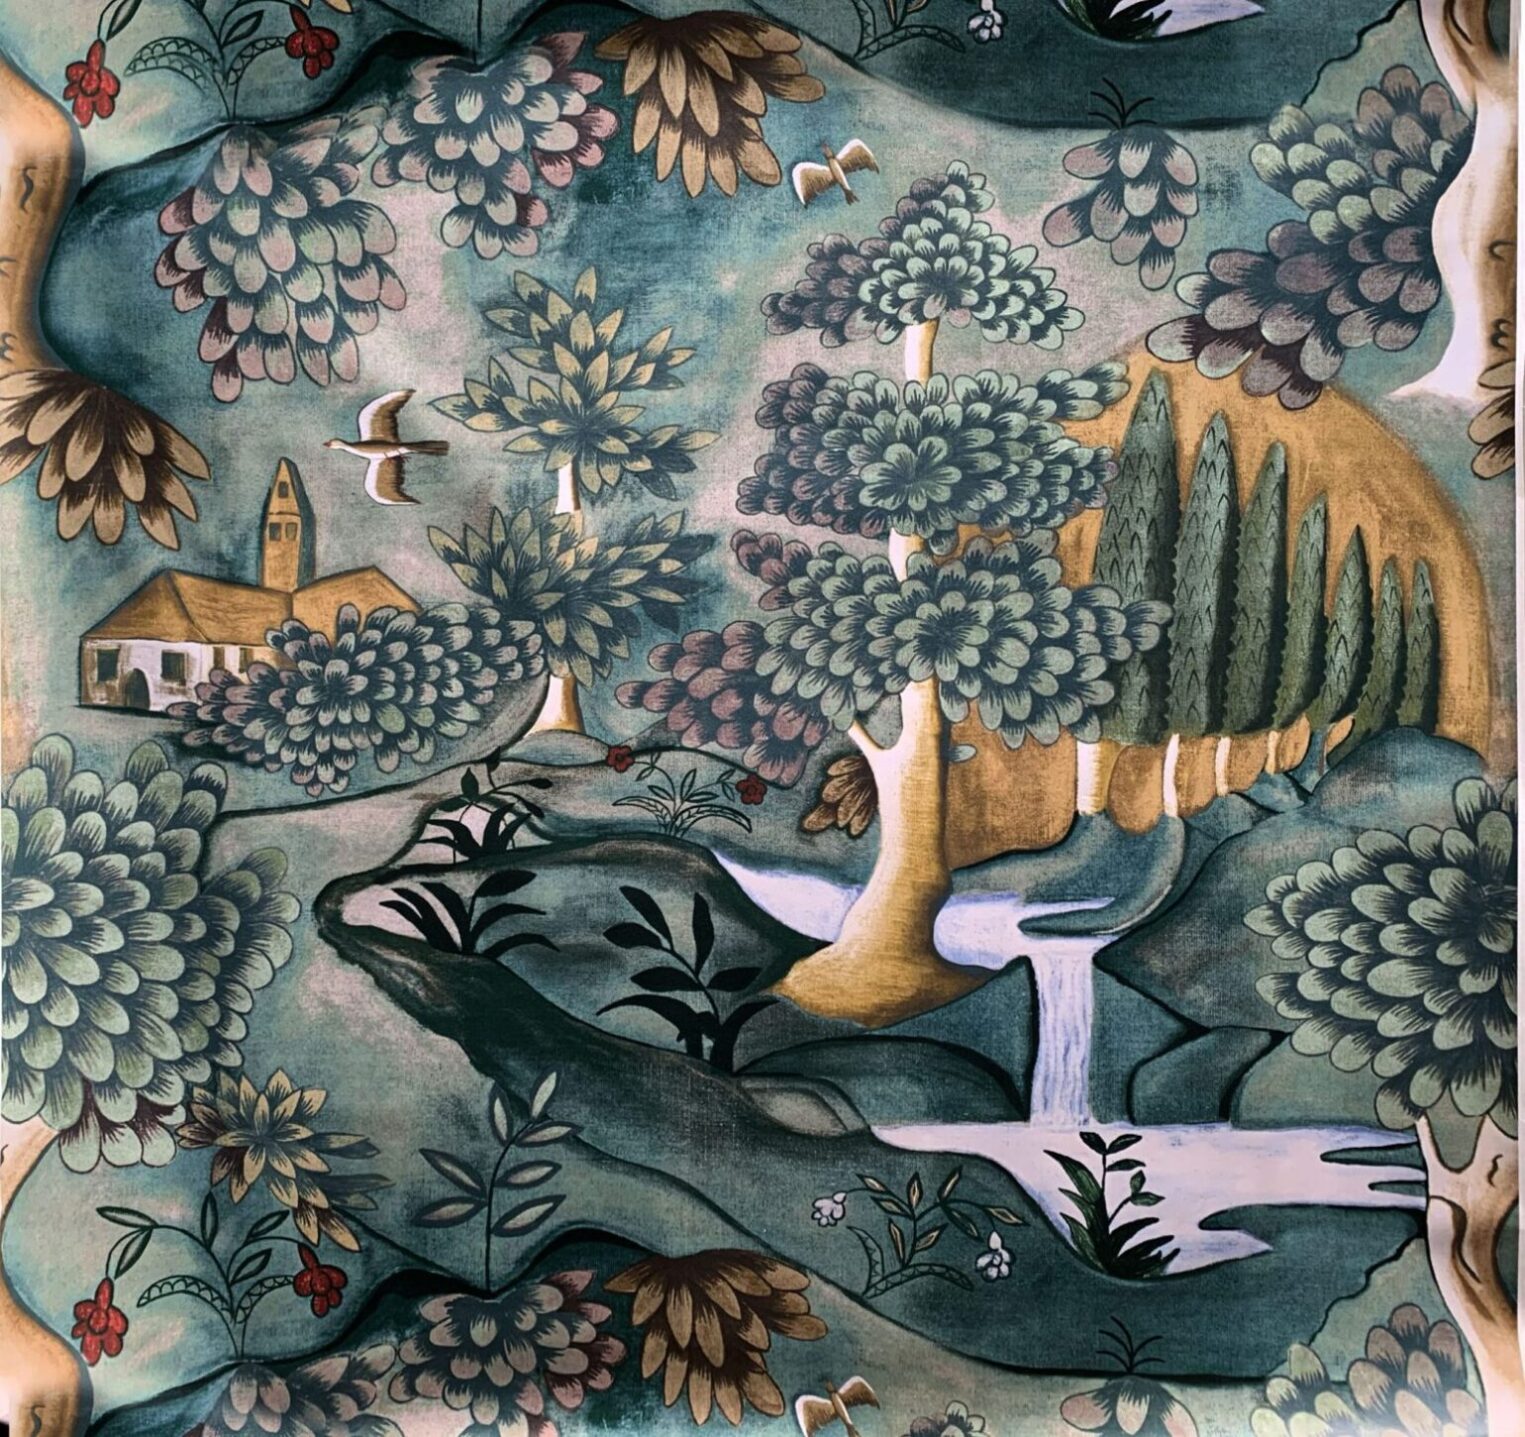 Hand-painted artwork depicting a forest with flying birds, meandering river, and a central house.